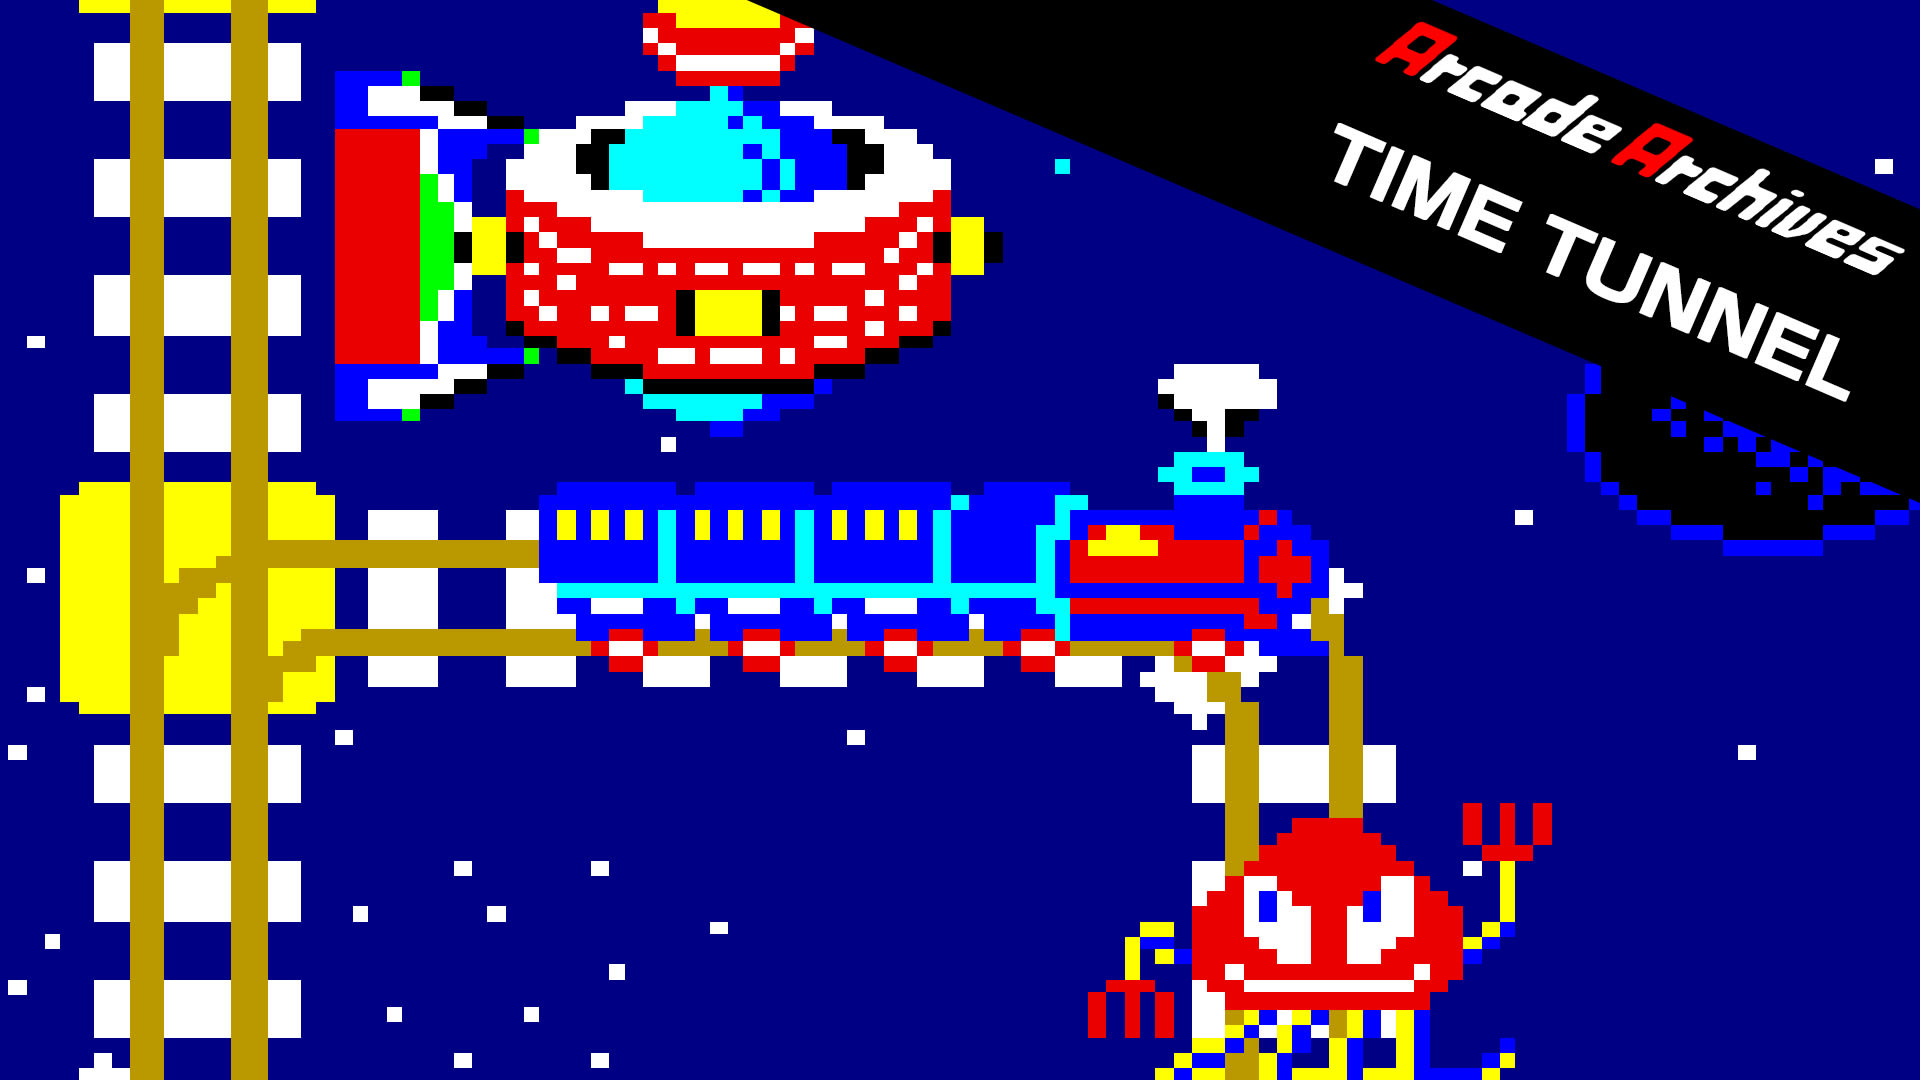 Arcade Archives TIME TUNNEL